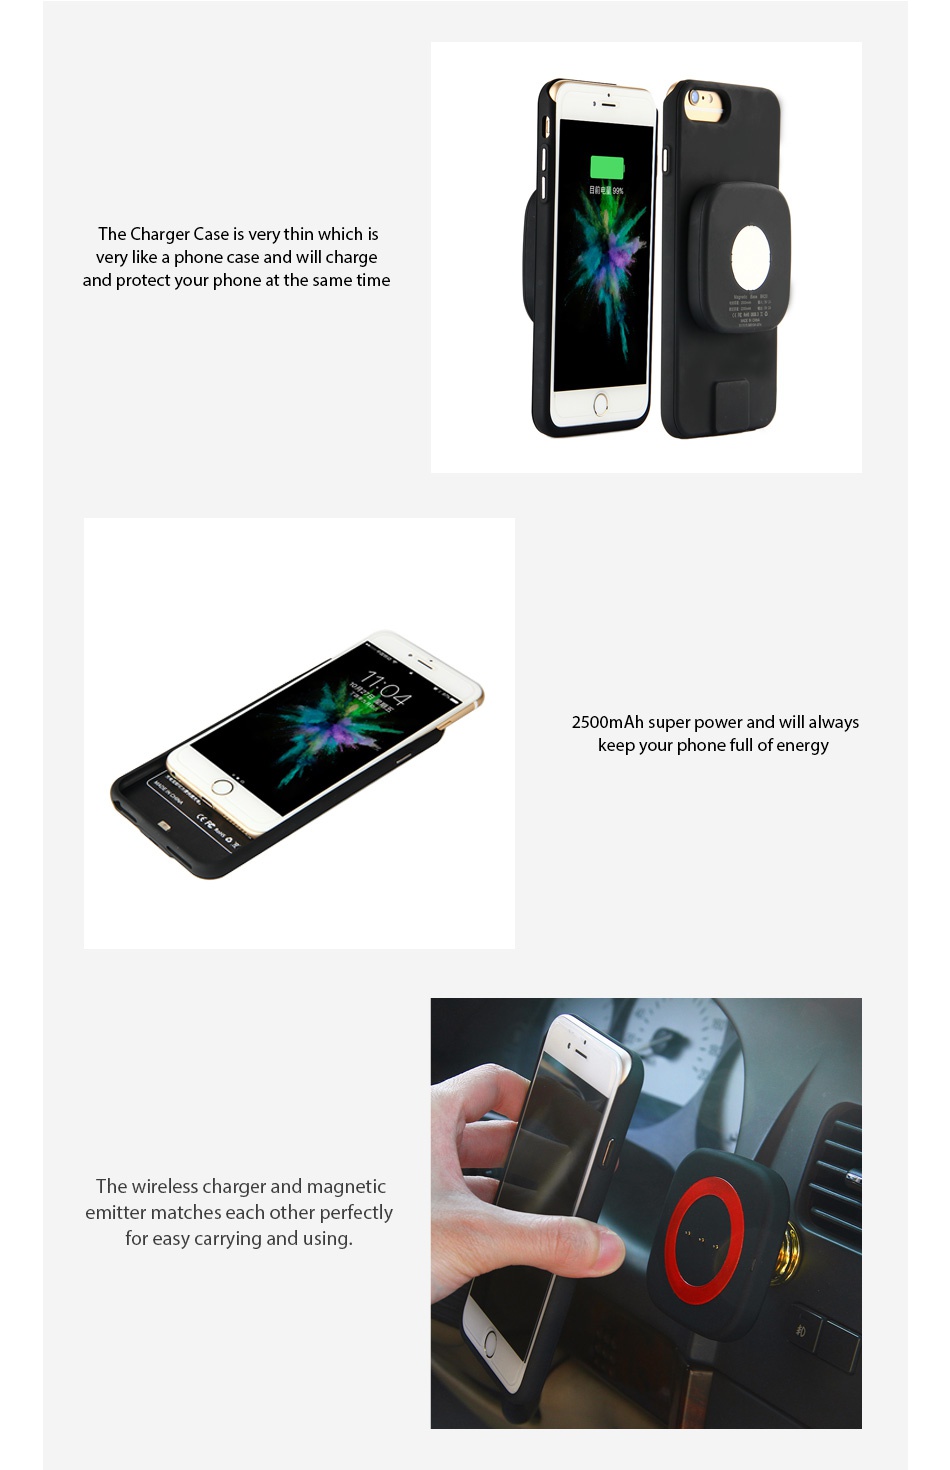 Magnetic Wireless Charger Kit for iPhone 2500mAh The charger case is very thin which very like a phone case and will charge and protect your phone at the same time 2500mAh r power and will always The wireless charger and magnetic mitter matches each other perfectly for easy carrying and using